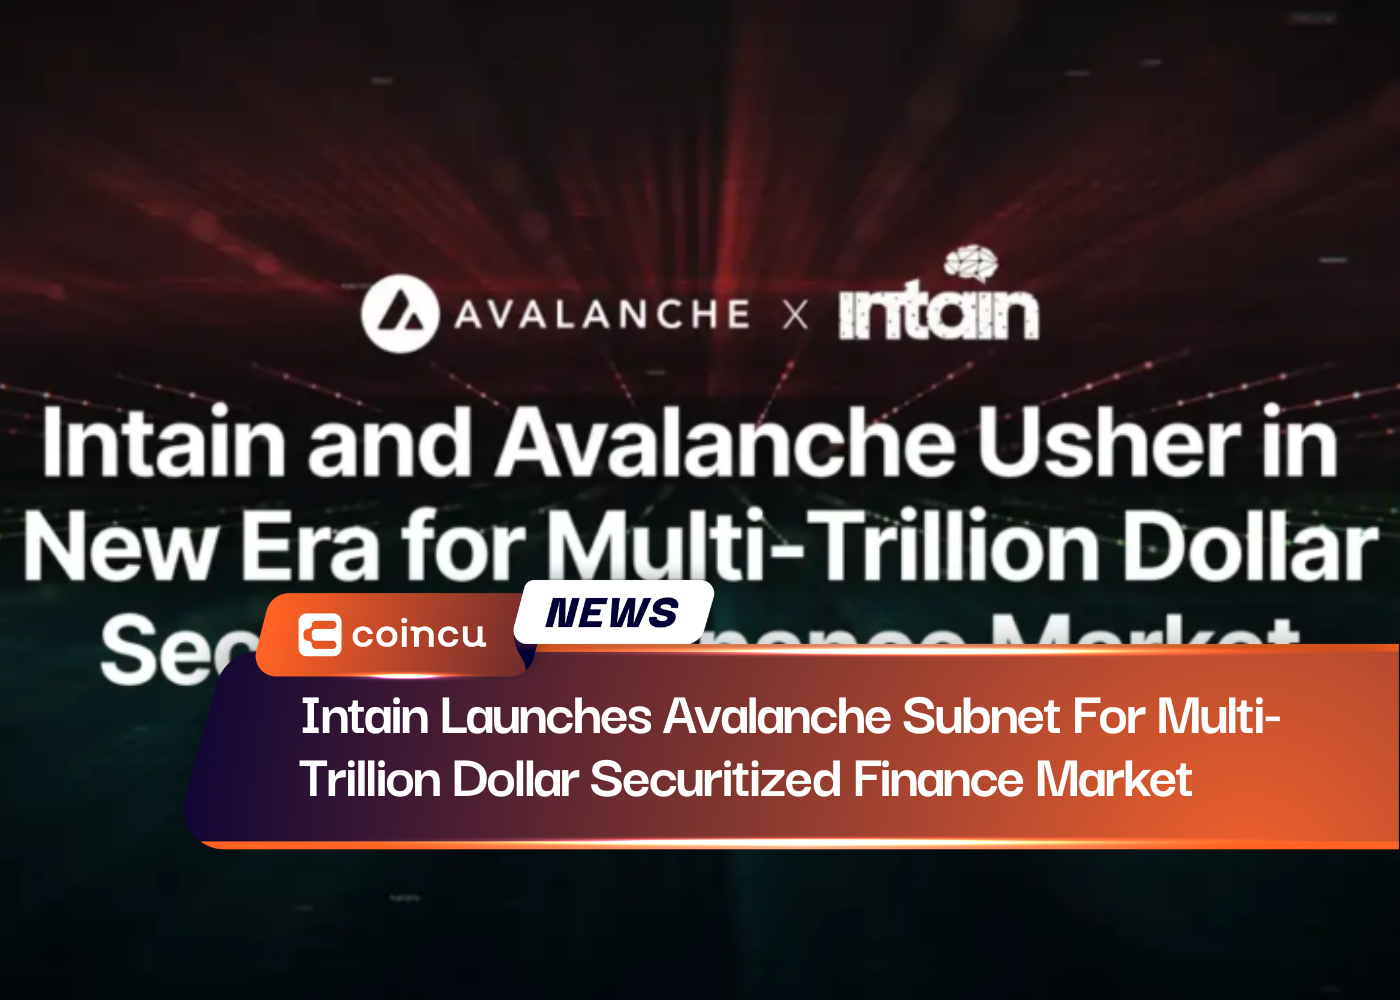 Intain Launches Avalanche Subnet For Multi-Trillion Dollar Securitized Finance Market